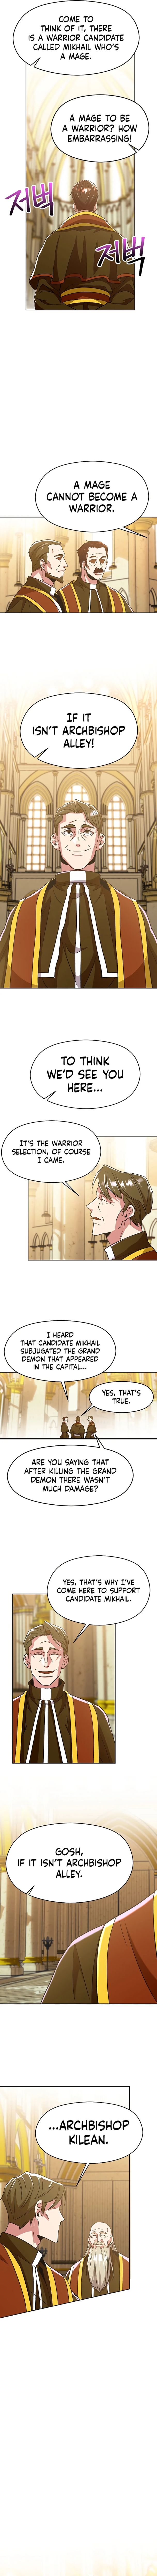 Archmage Transcending Through Regression - Chapter 67 Page 5